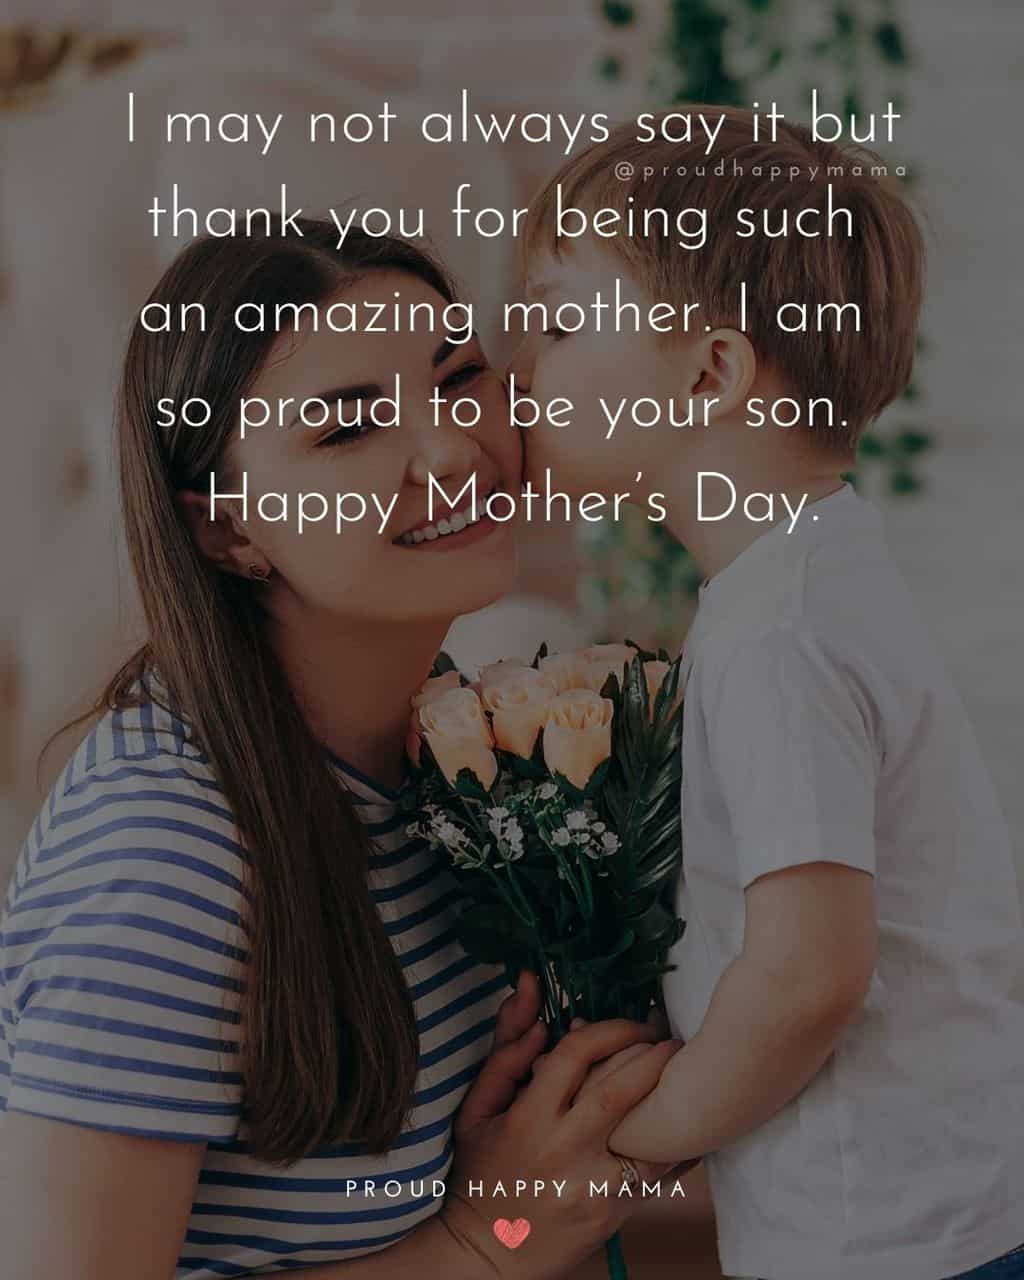 Happy Mothers Day Quotes From Son - I may not always say it but thank you for being such an amazing mother. I am so proud